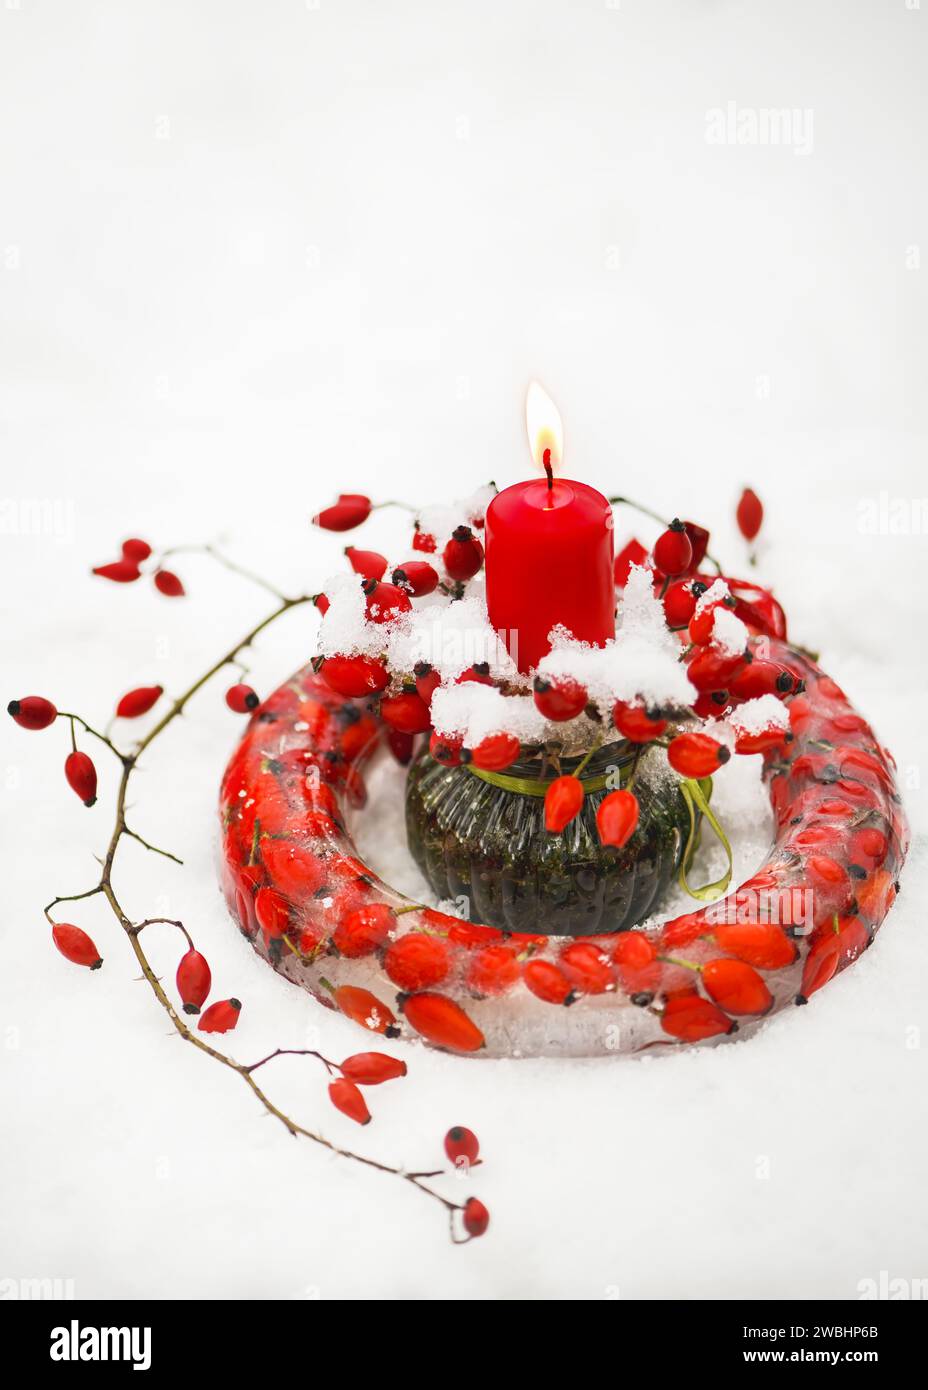 Handmade frozen Christmas wreath in shape of ring cake made of ice, red rose hips berries with burning red candle in snow. Garden outdoor decoration Stock Photo